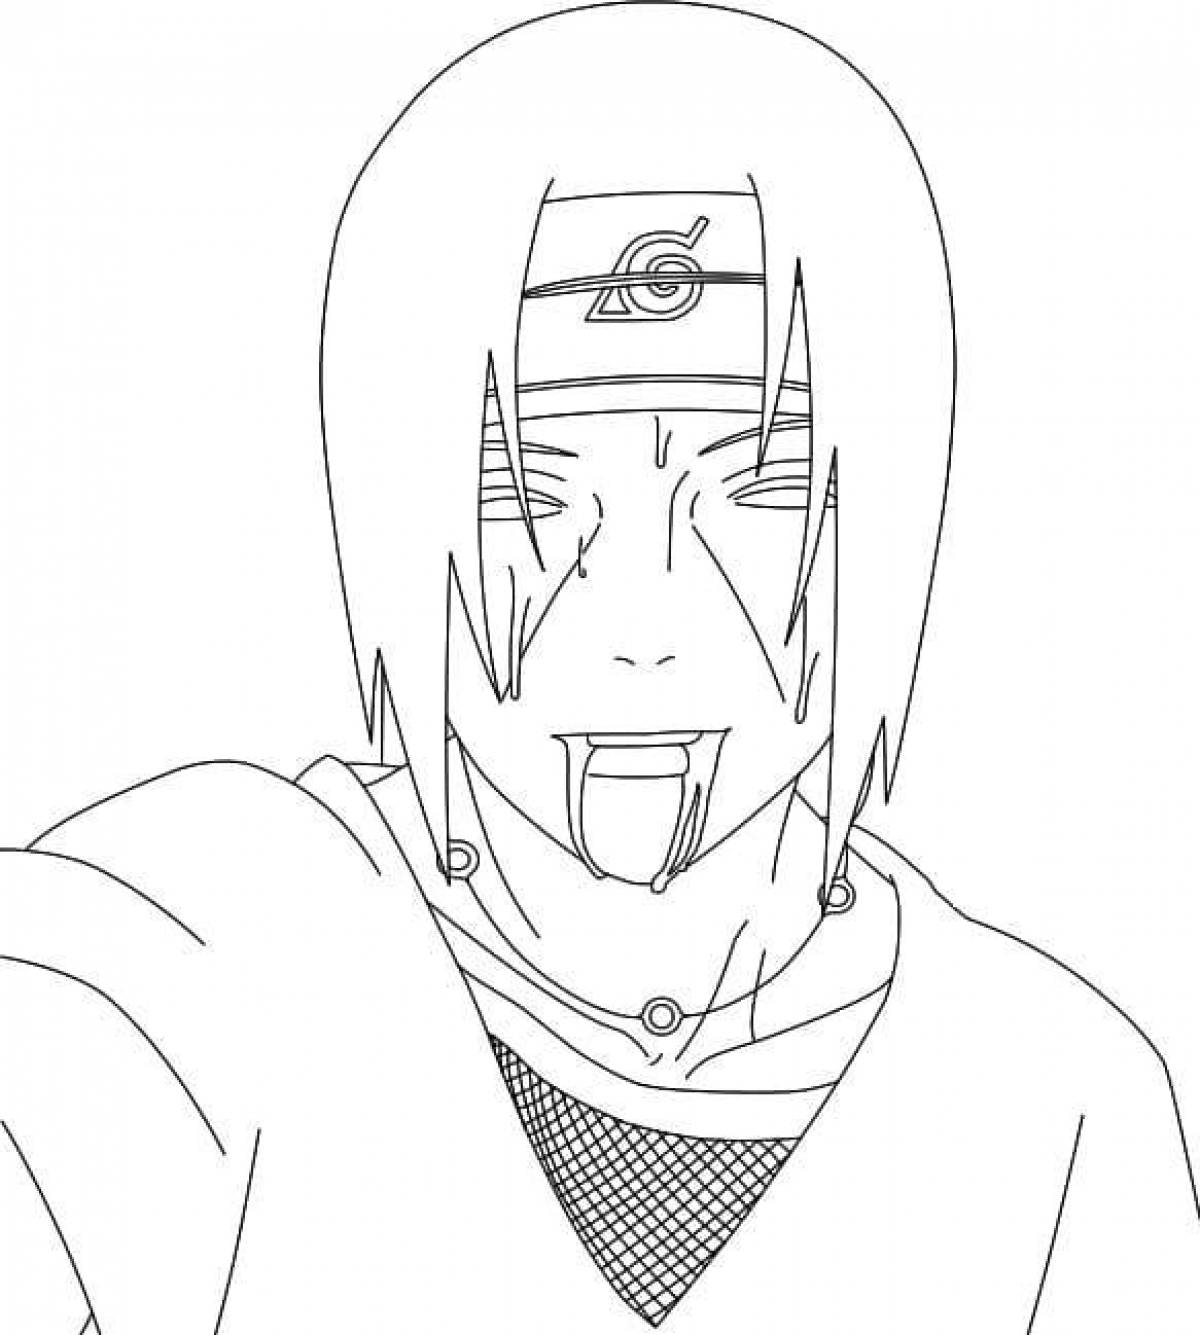 Charming itachi coloring page